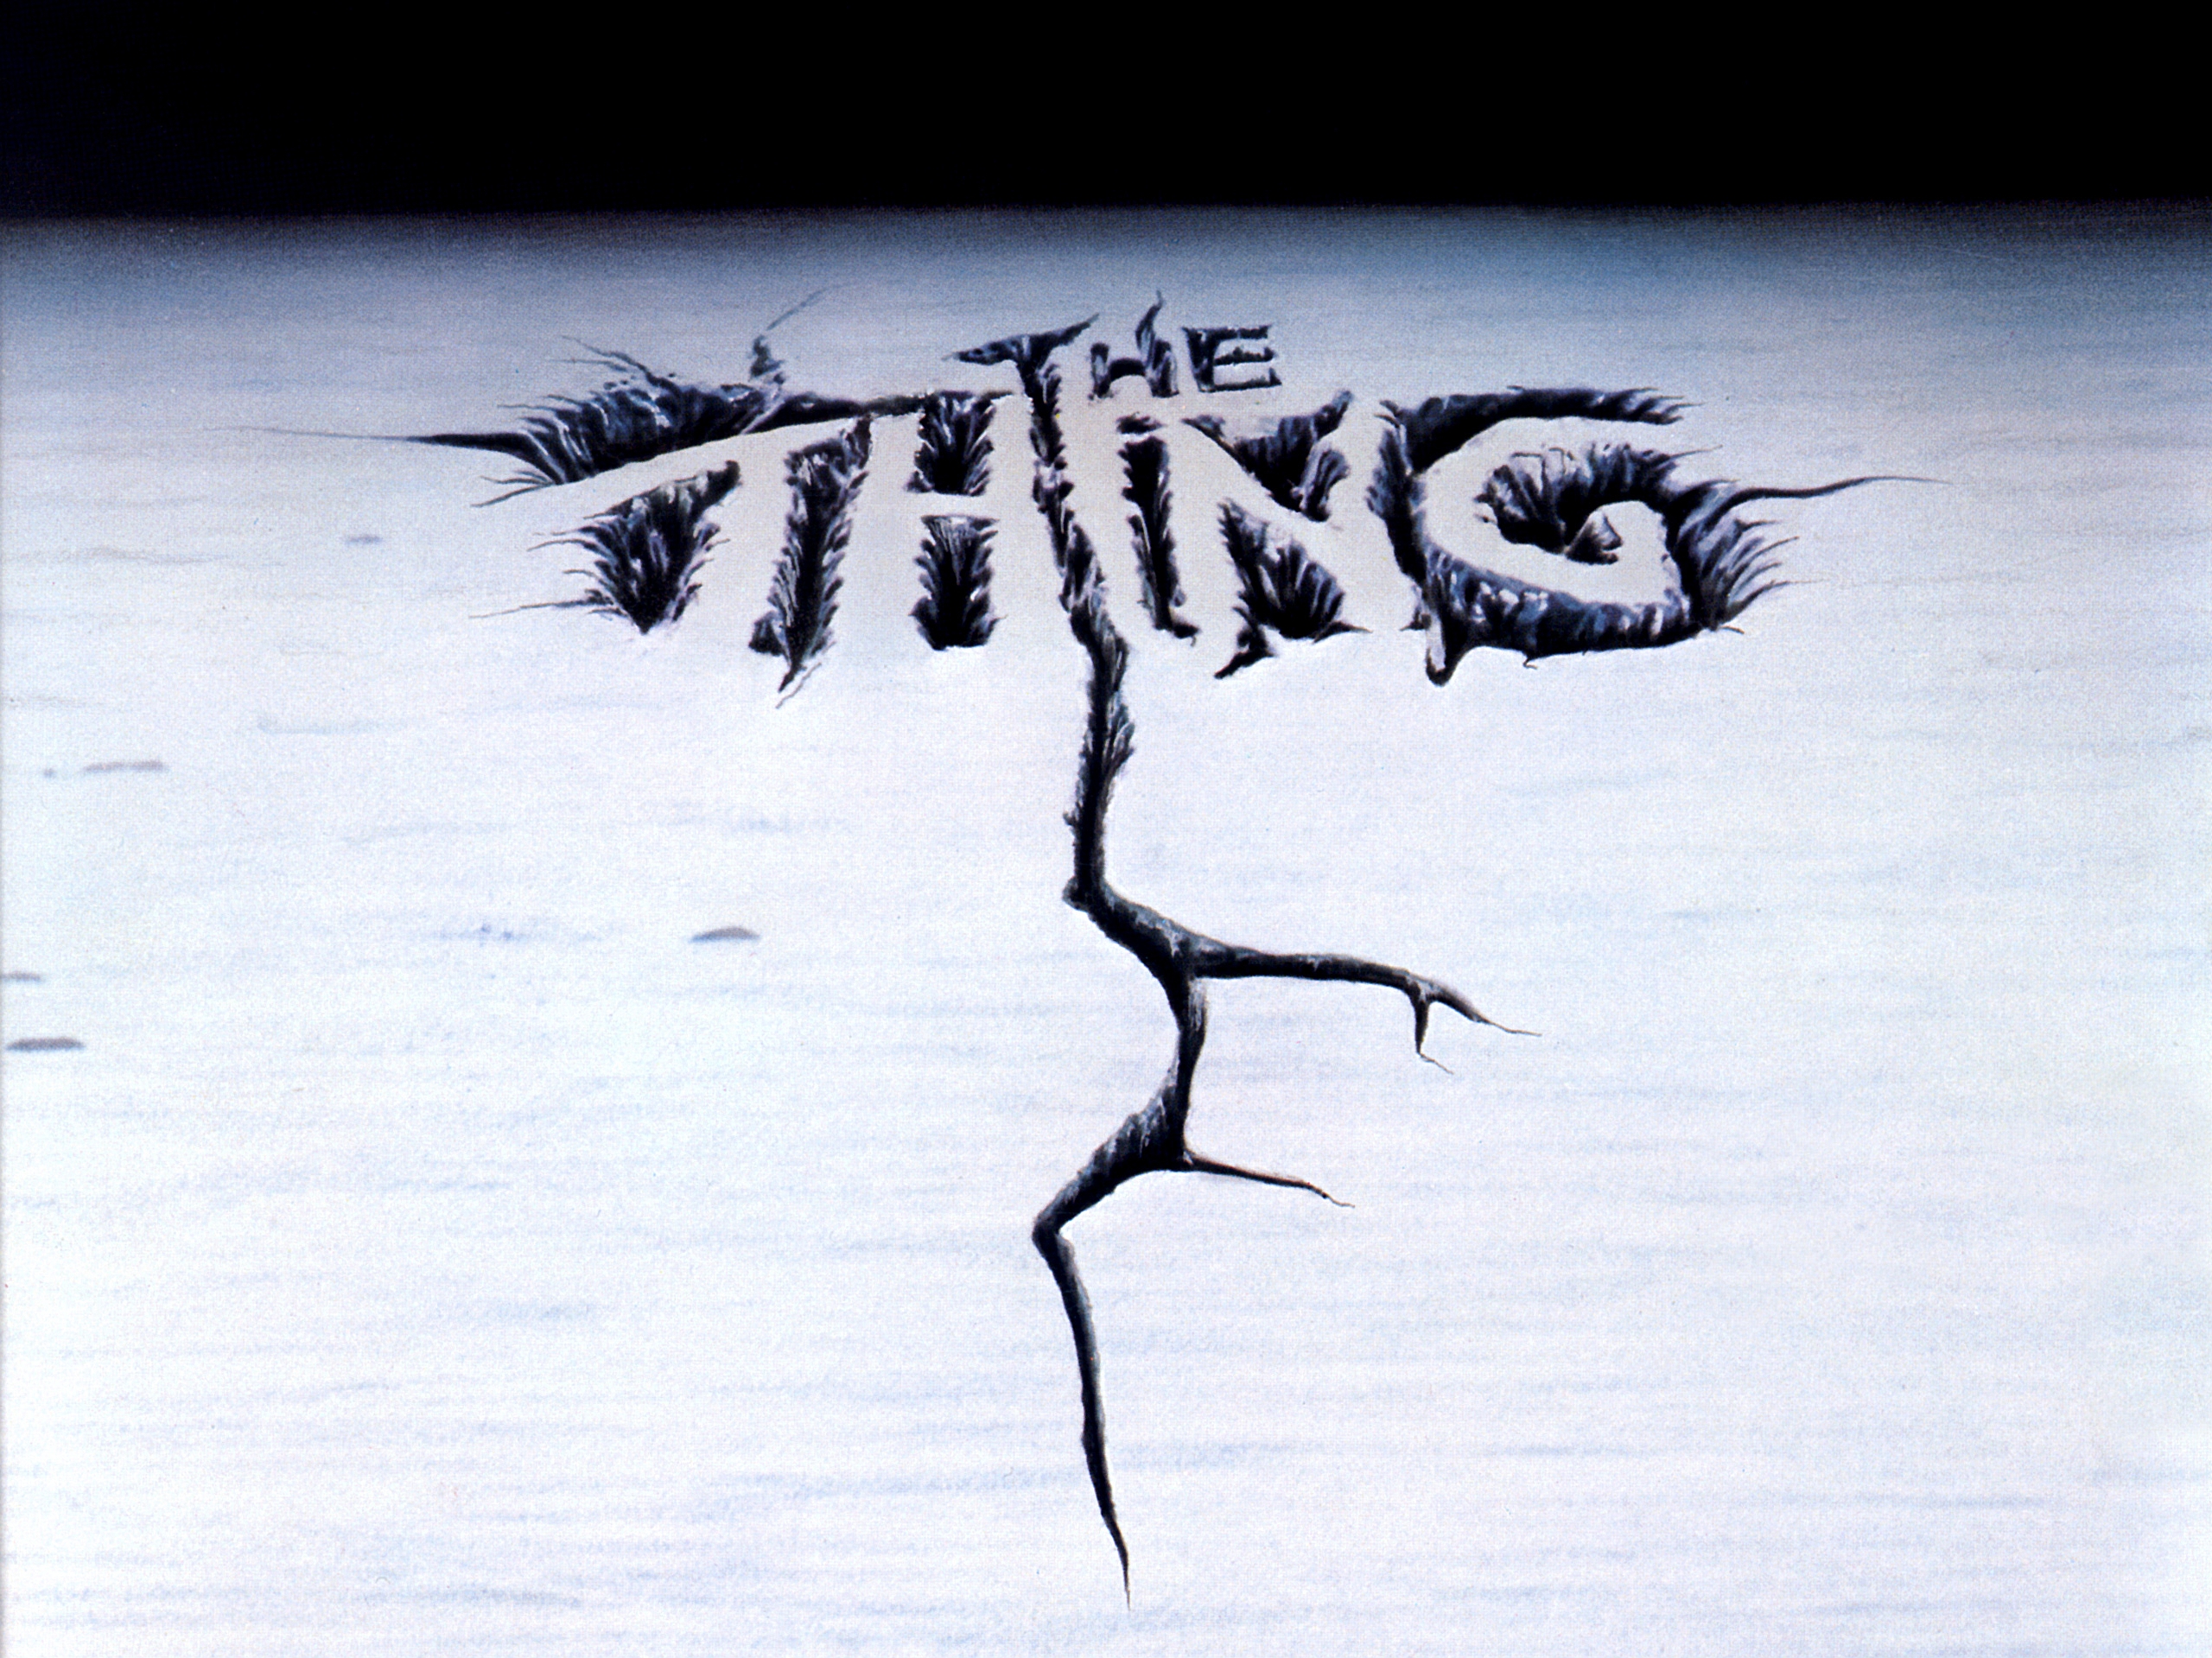 The Thing (1982) Wallpapers